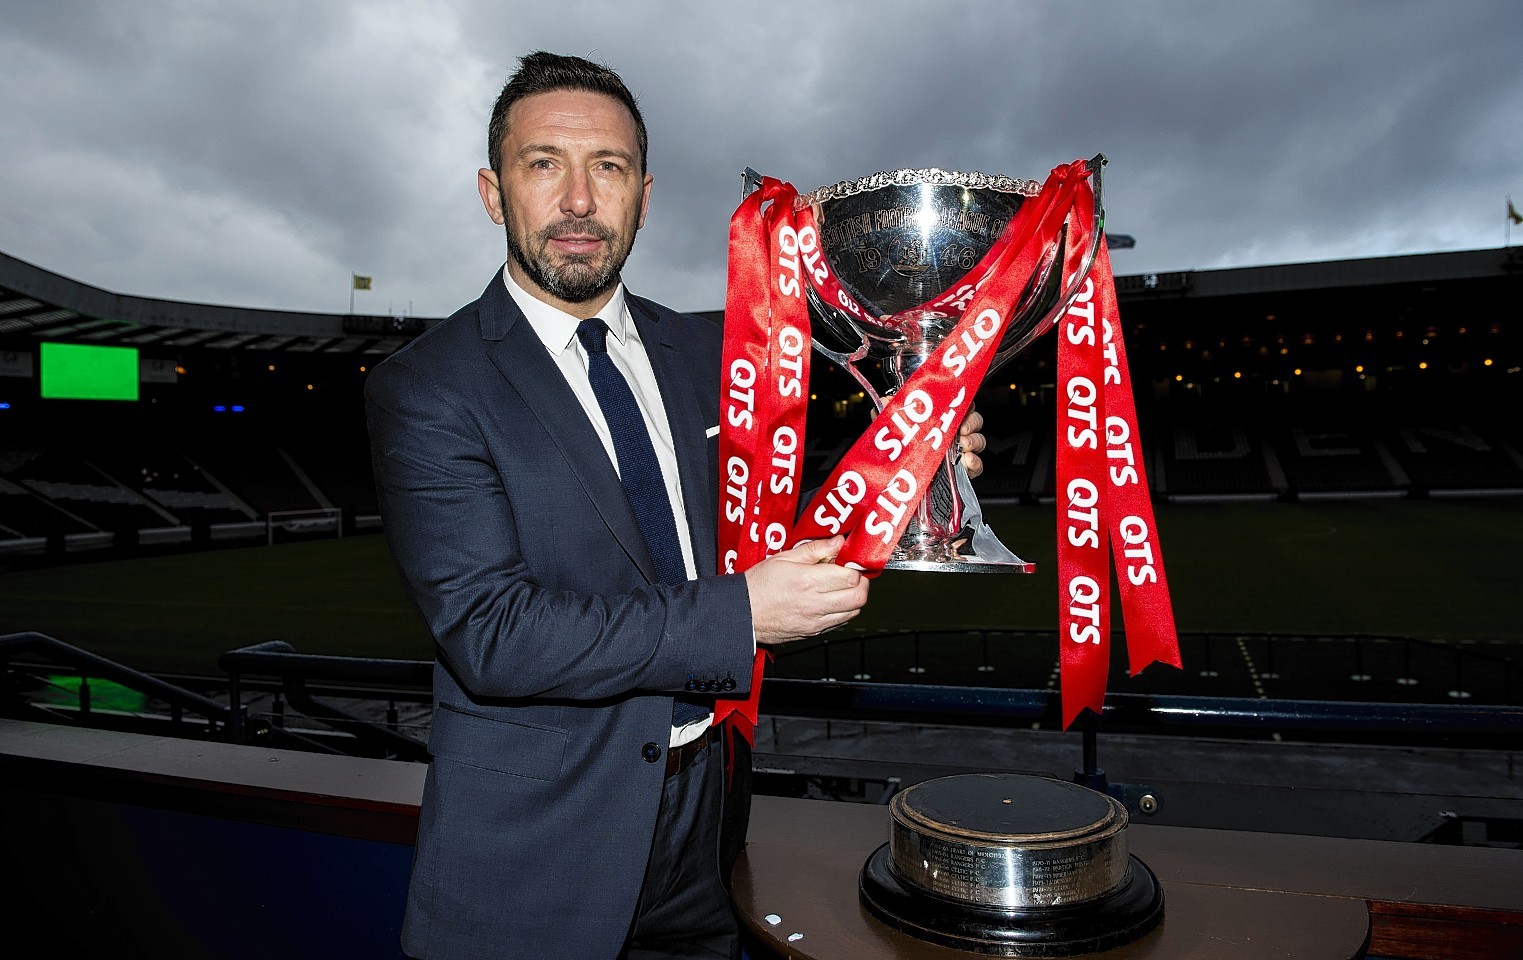 Derek McInnes has been rewarded for guiding Aberdeen to the top of the league